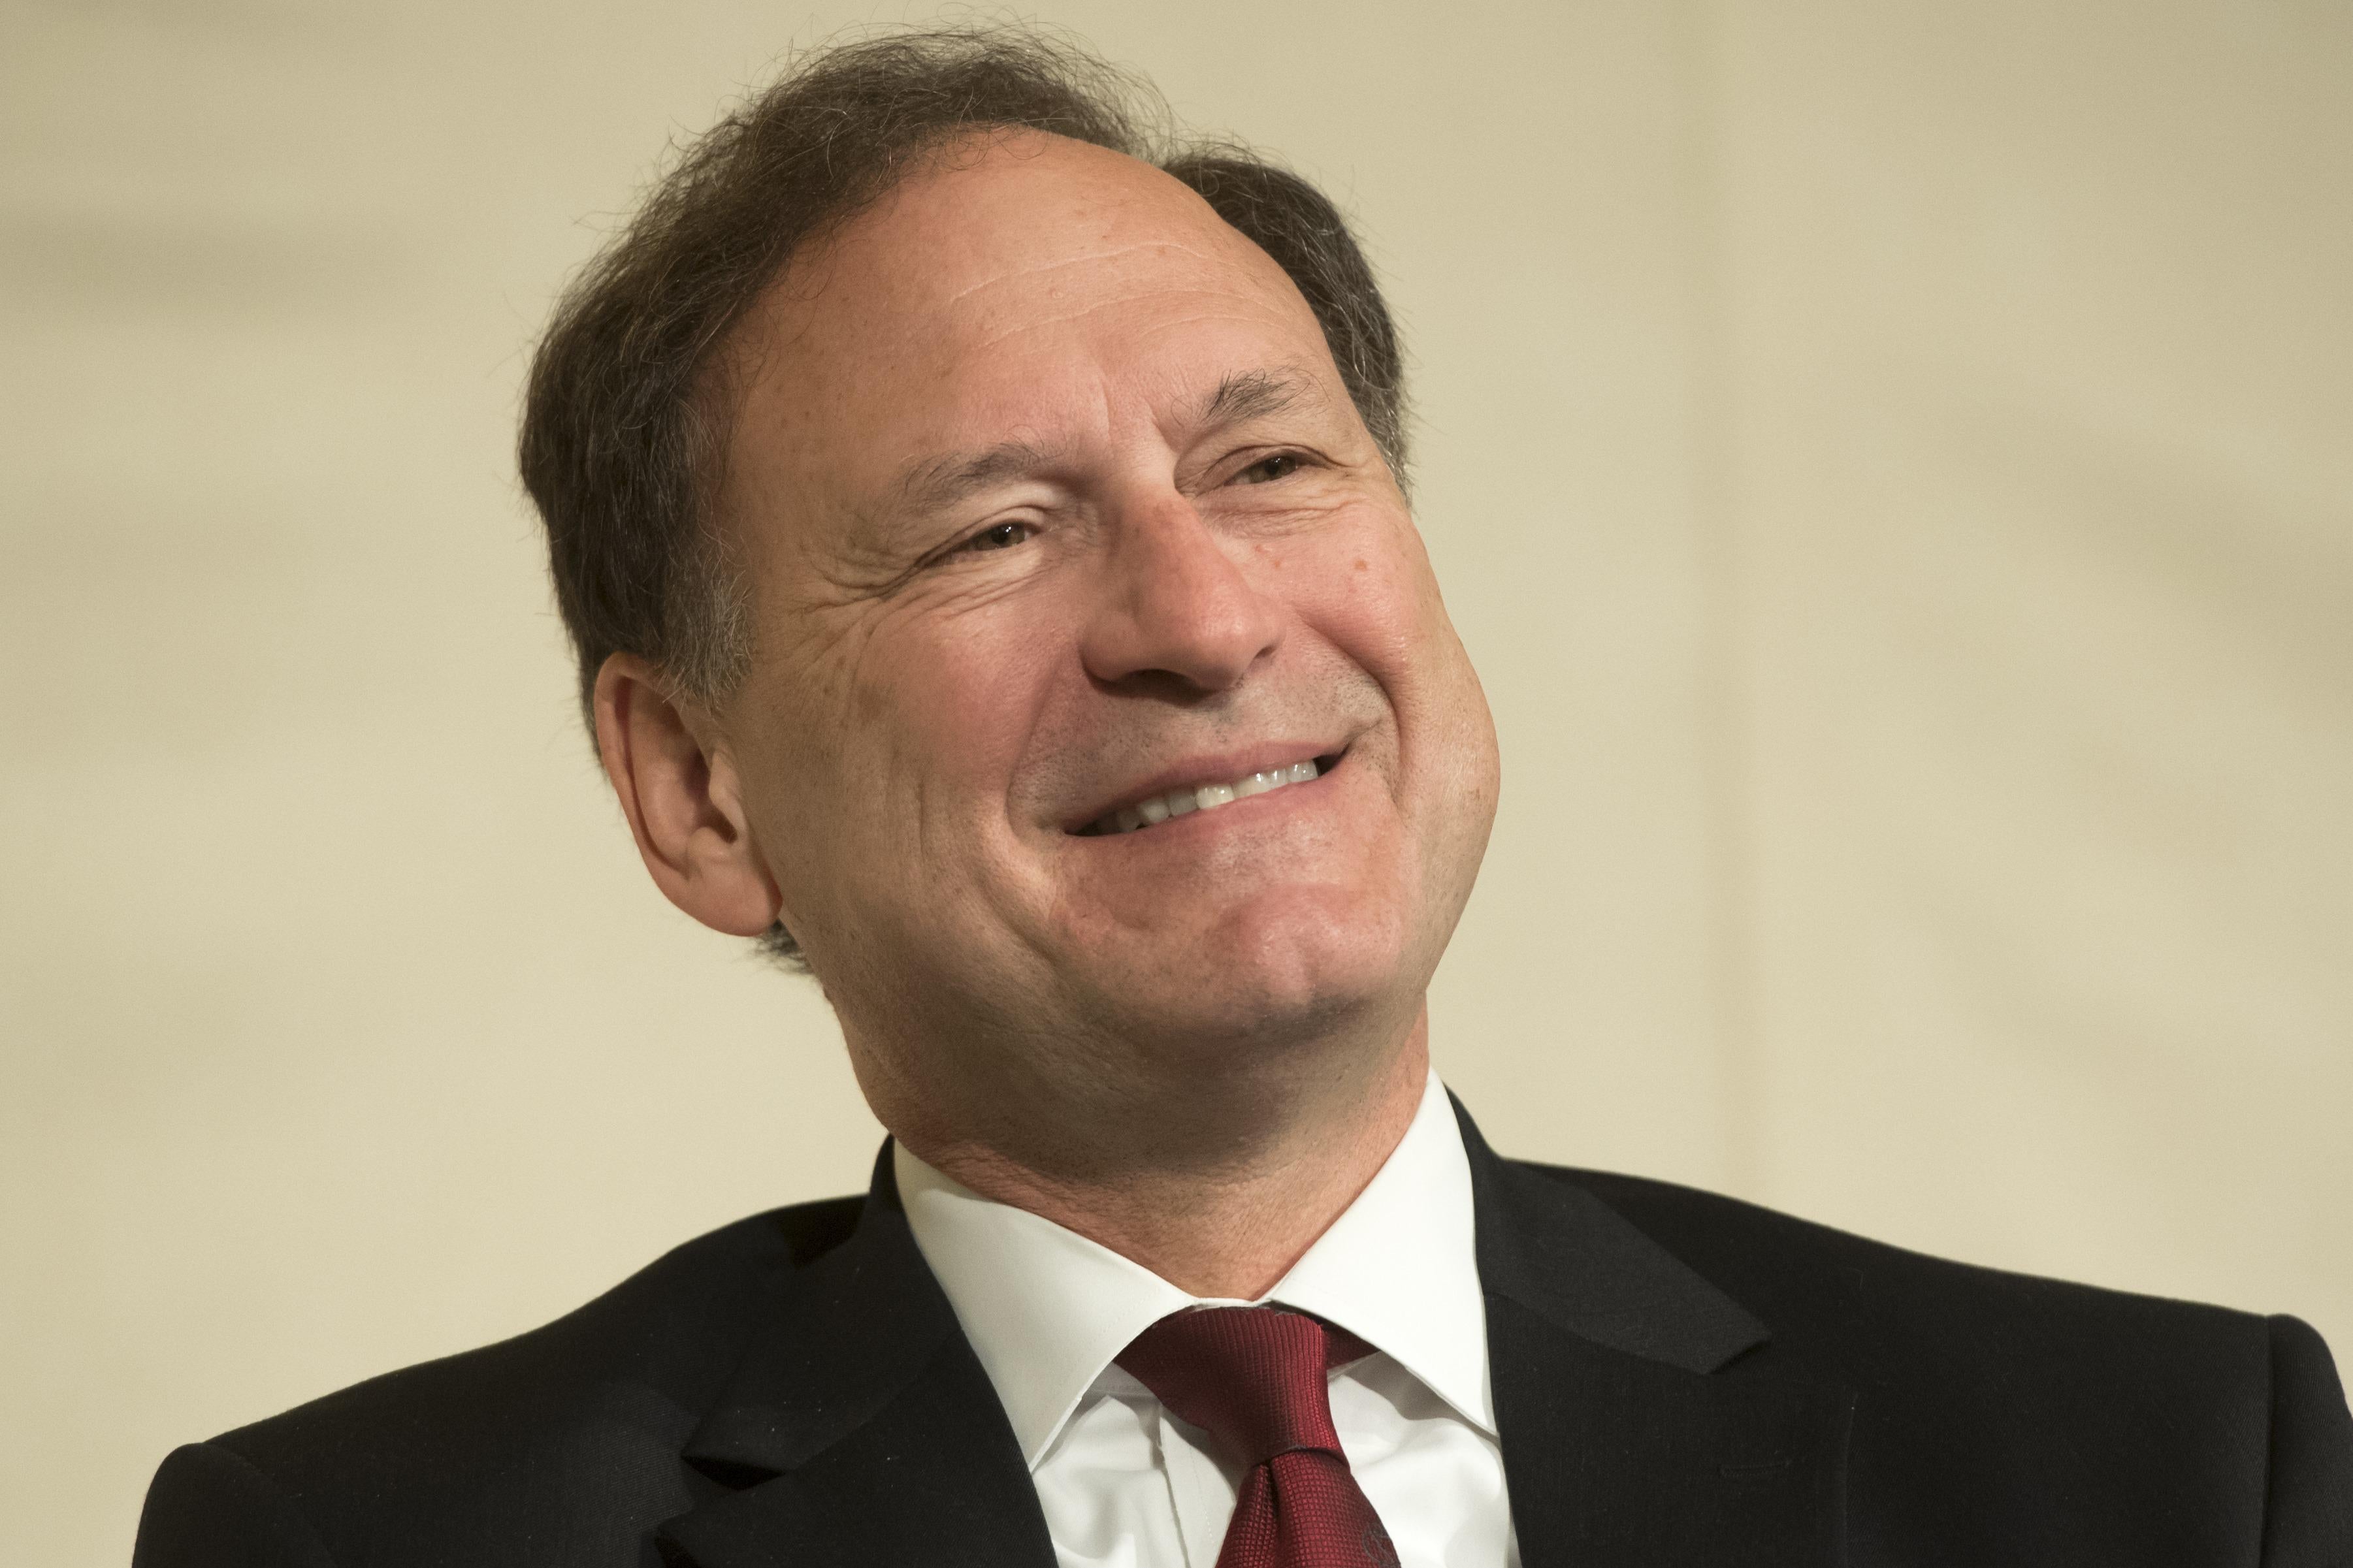 Supreme Court Justice Samuel Alito speaks during the American Bar Association’s Section on International Law Conference in Washington on April 27.